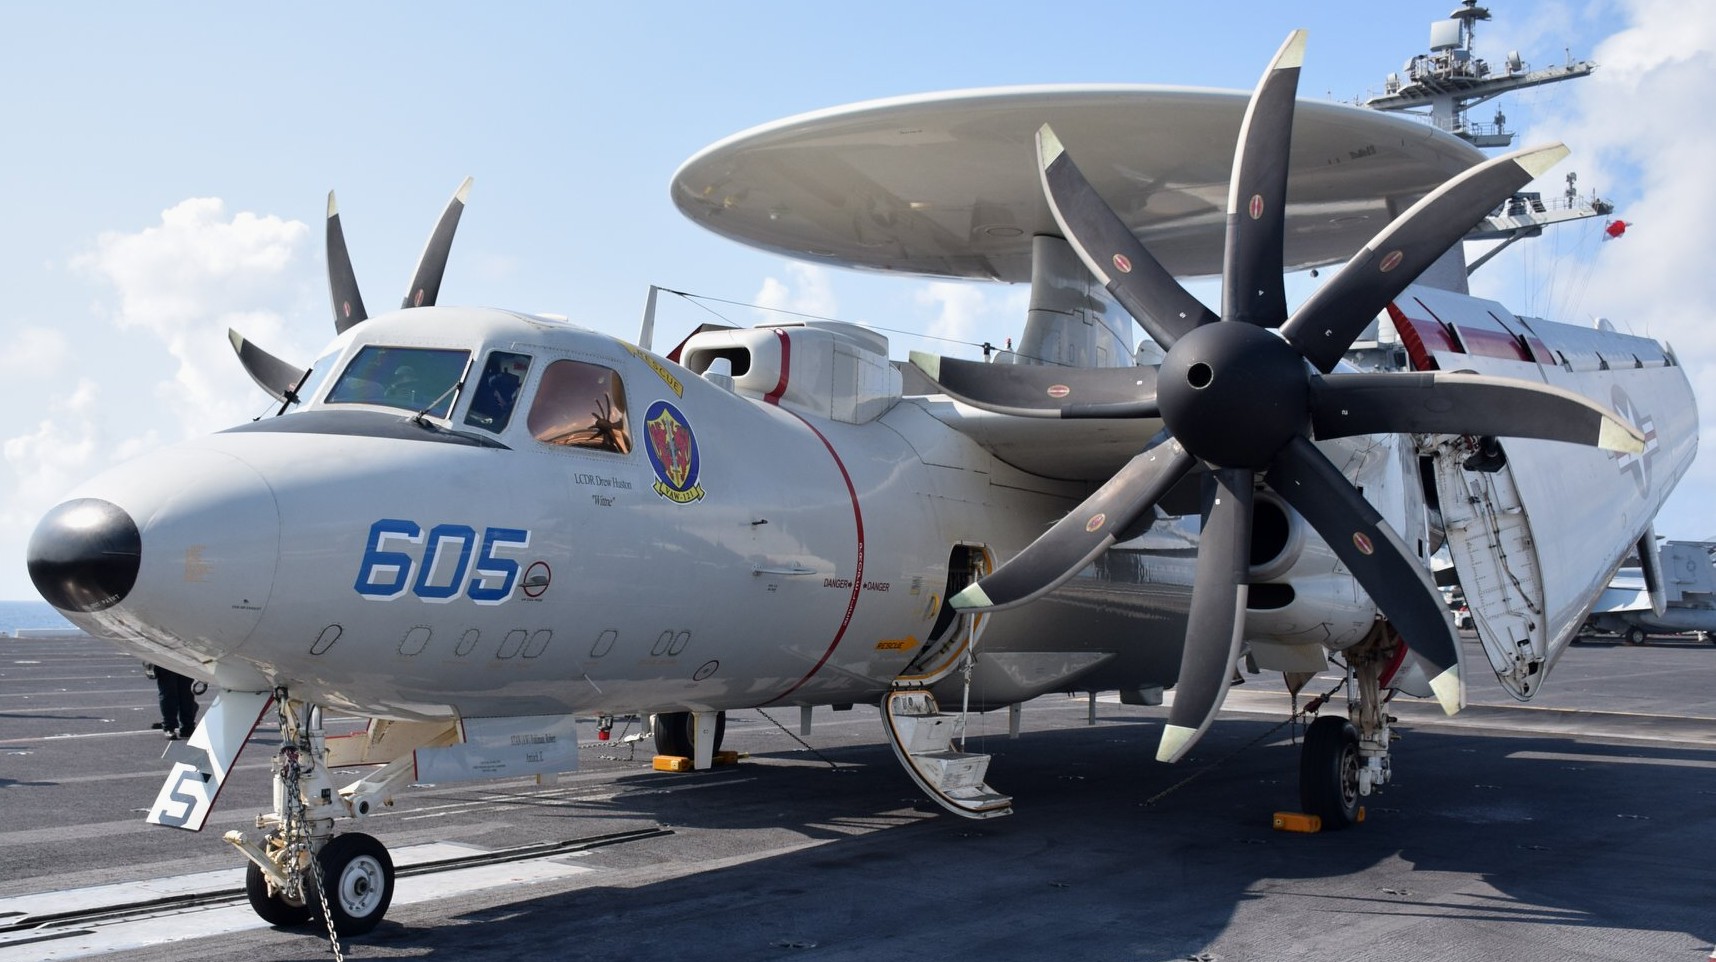 vaw-121 bluetails carrier airborne early warning squadron us navy e-2d advanced hawkeye cvw-7 uss abraham lincoln cvn-72 55